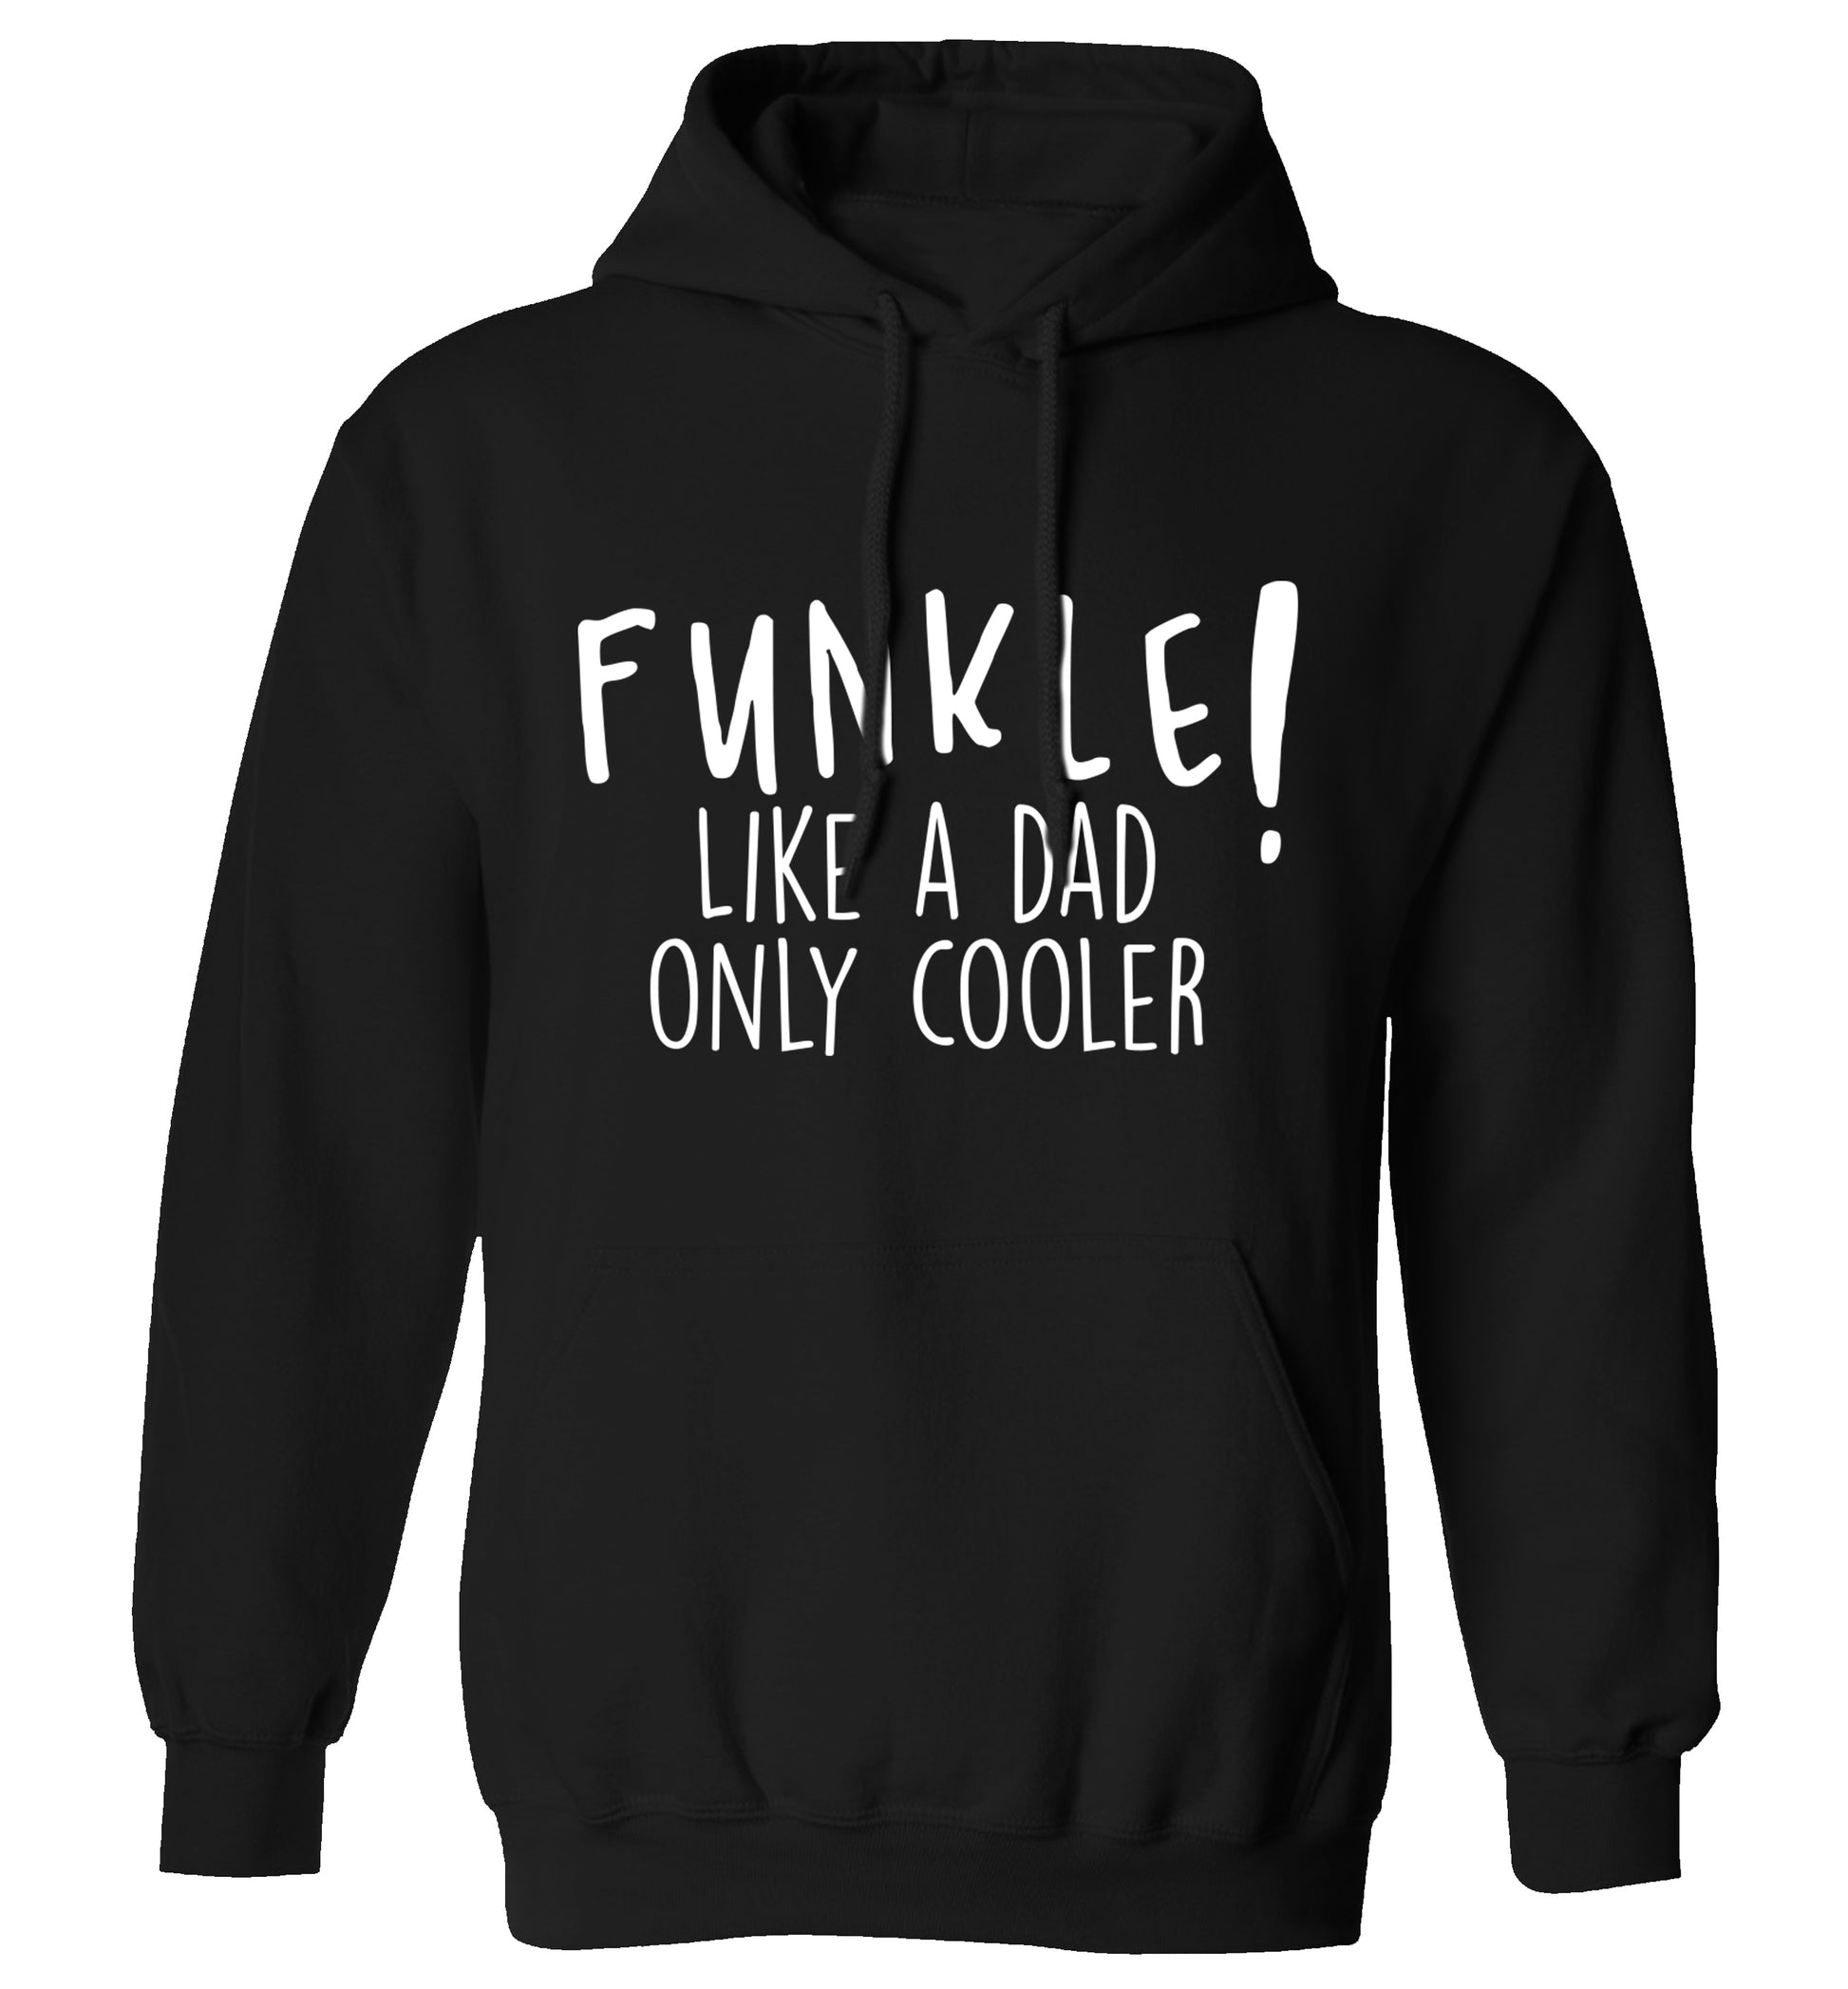 Funkle Like a Dad Only Cooler adults unisex black hoodie 2XL